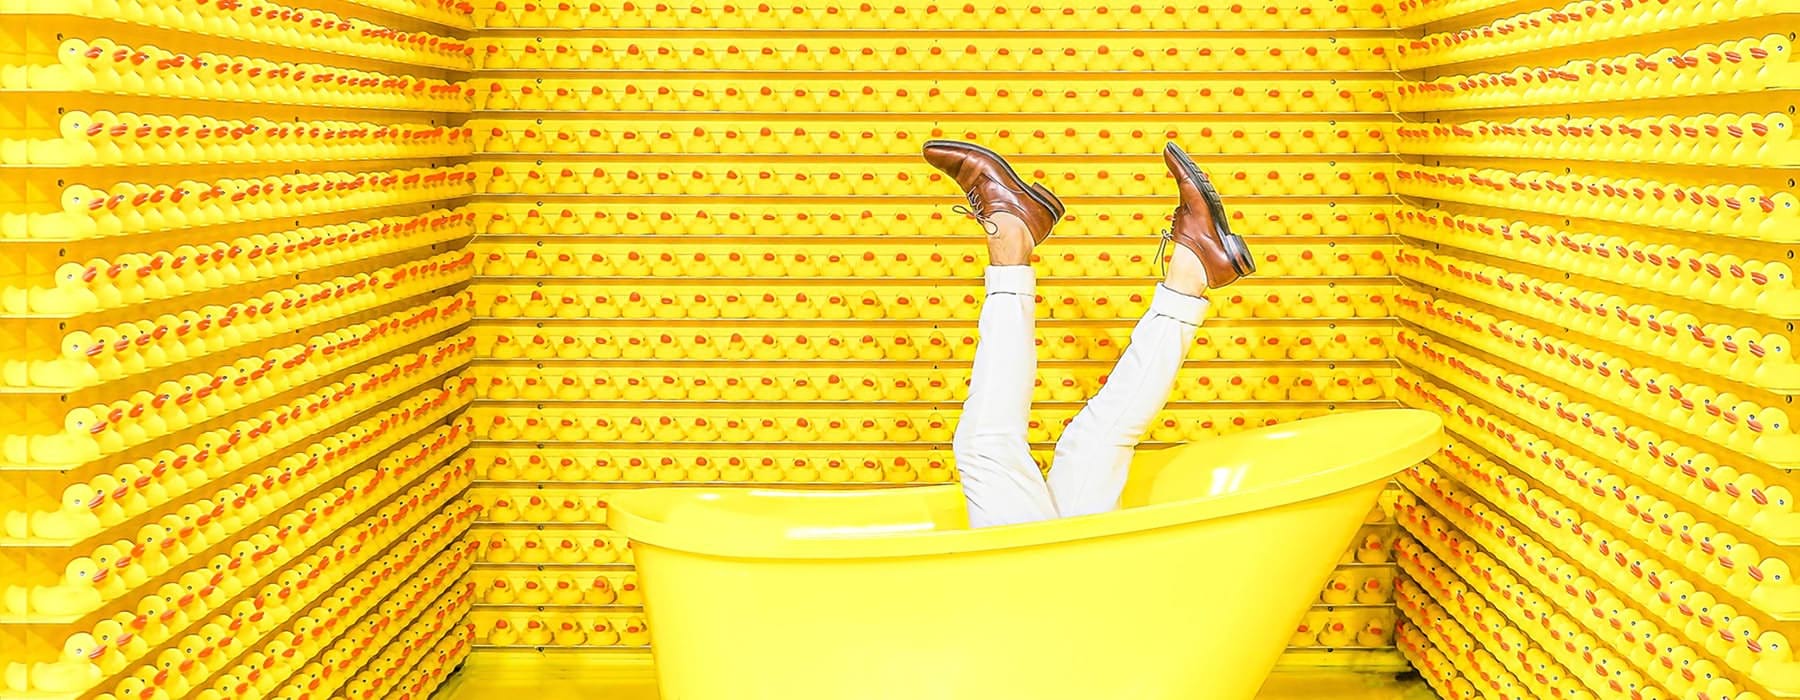 woman's legs stick out of yellow bathtub surrounded by yellow walls